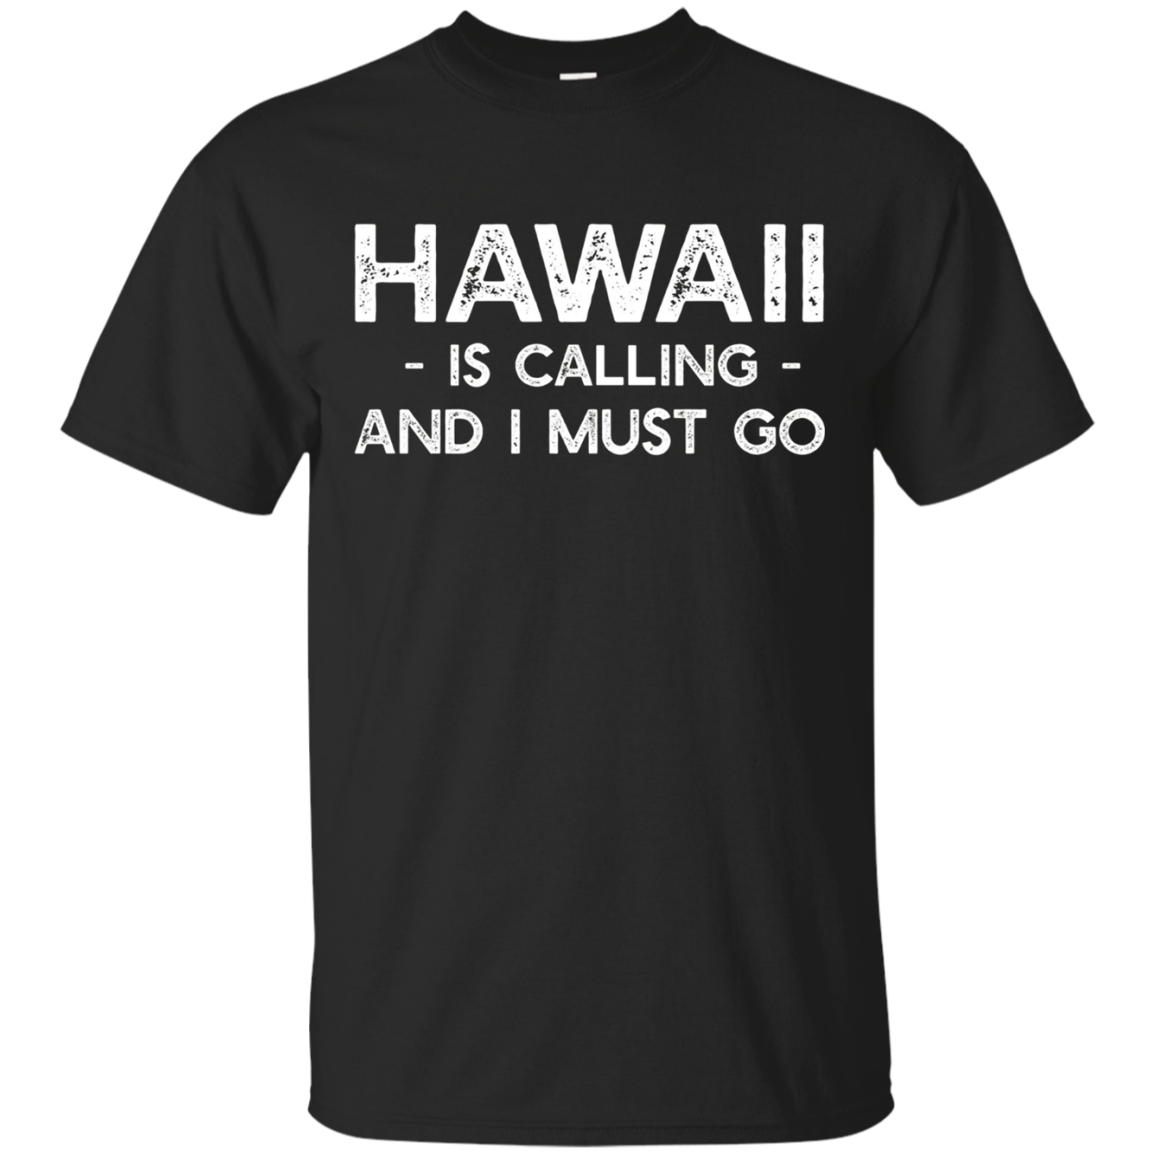 Hawaii Is Calling And I Must Go - Funny Travel T-shirt